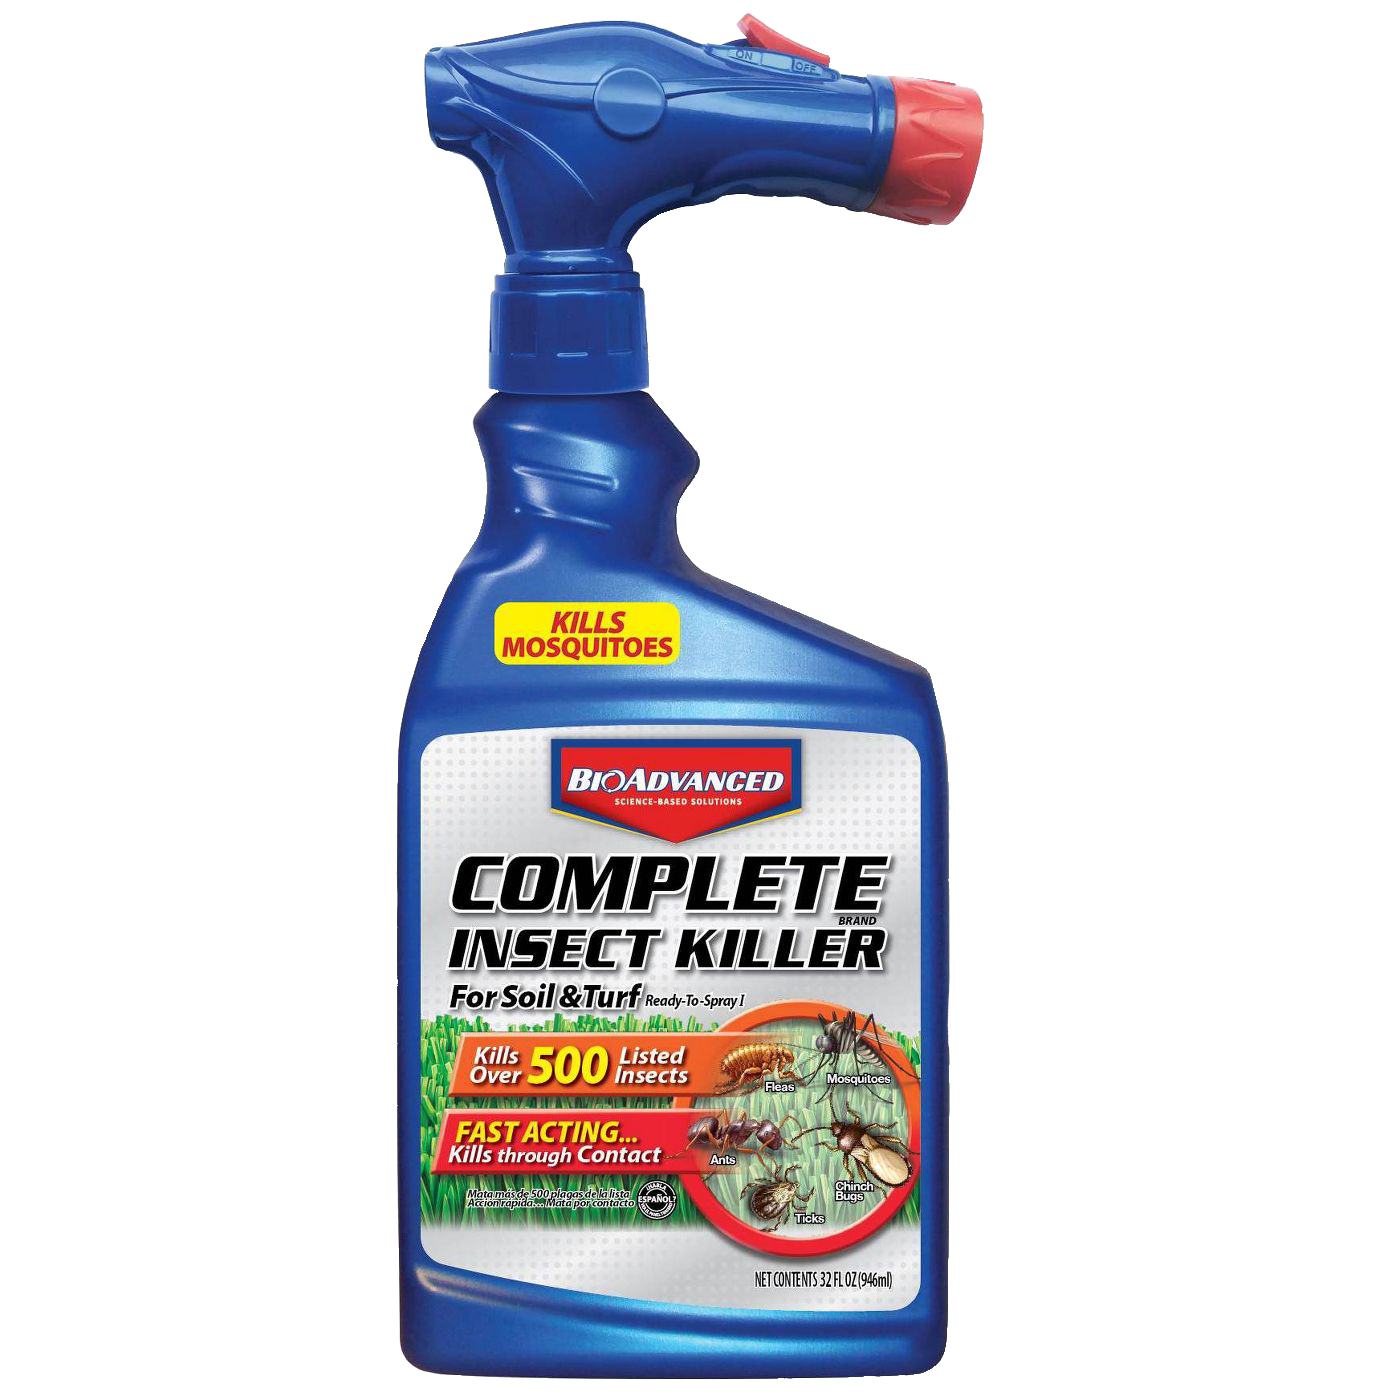 Complete Insecticide, Insect Killer for Soil and Turf, Bug Killer, Soil and Turf Insecticide